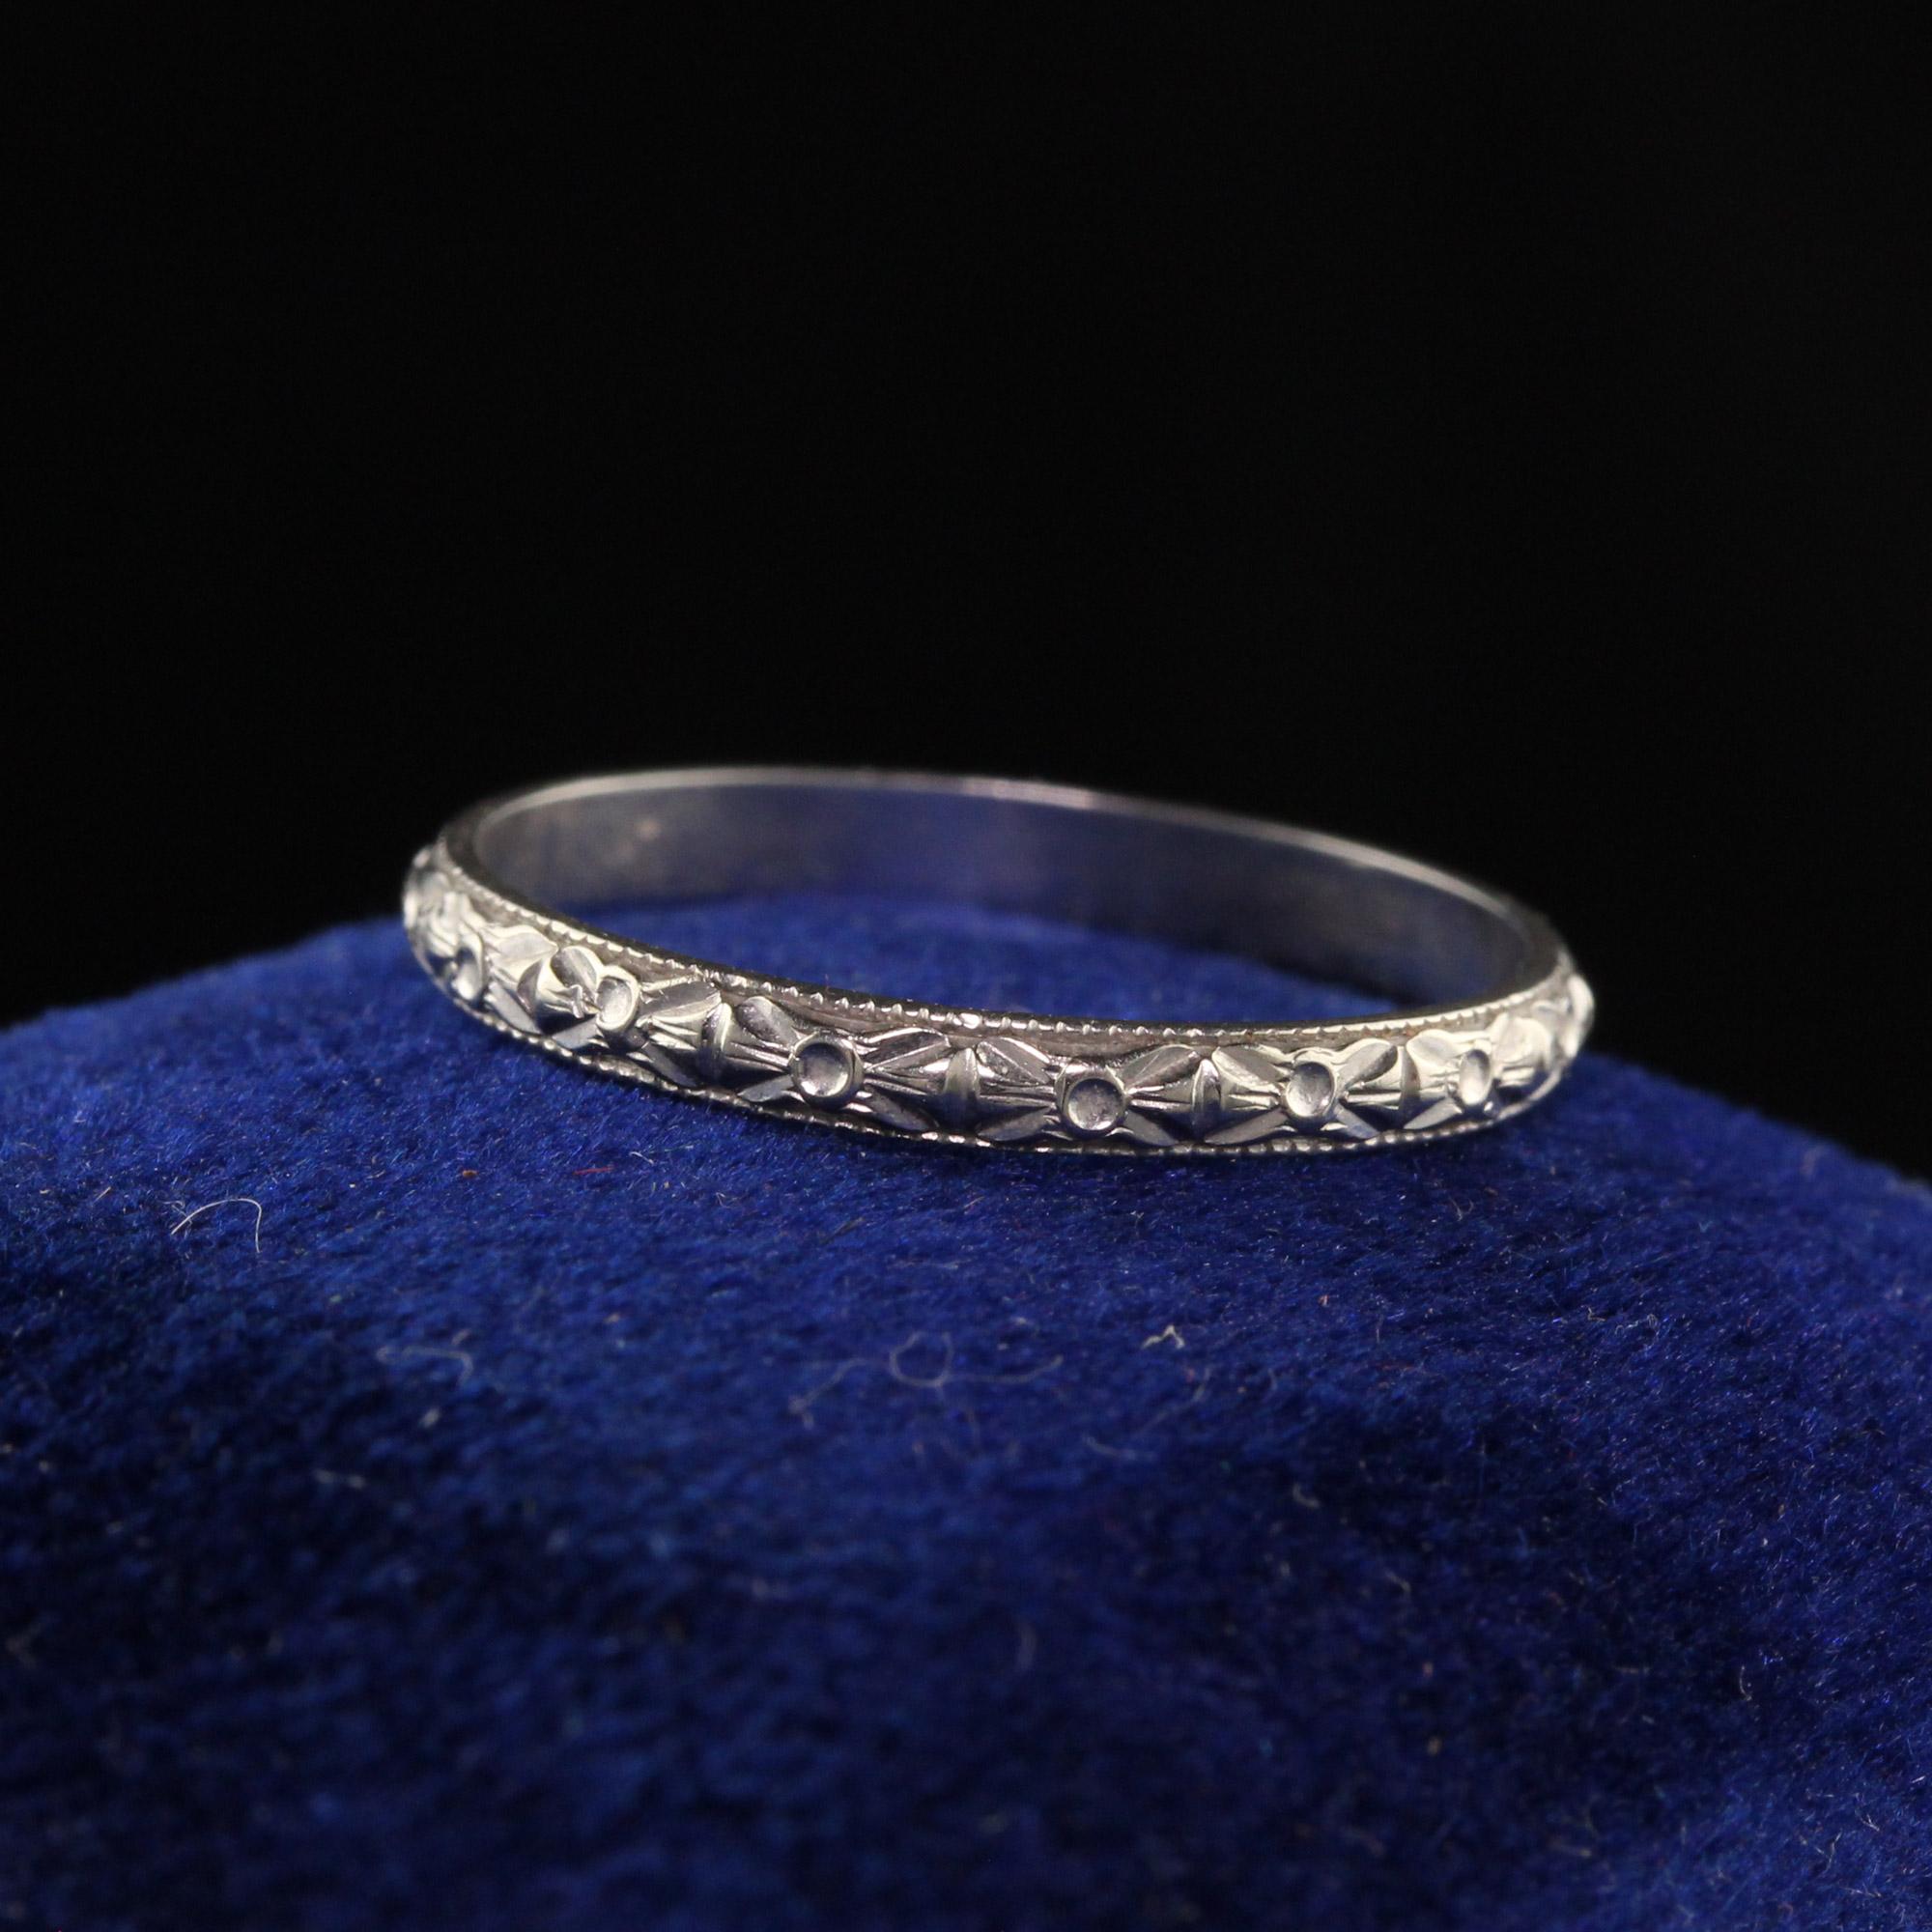 Beautiful Antique Art Deco 18K White Gold Bristol Engraved Wedding Band - Size 4 1/2. This beautiful wedding band has nice visible engravings going around the entire ring and is in great condition.

Item #R0977

Metal: 18K White Gold

Weight: 1